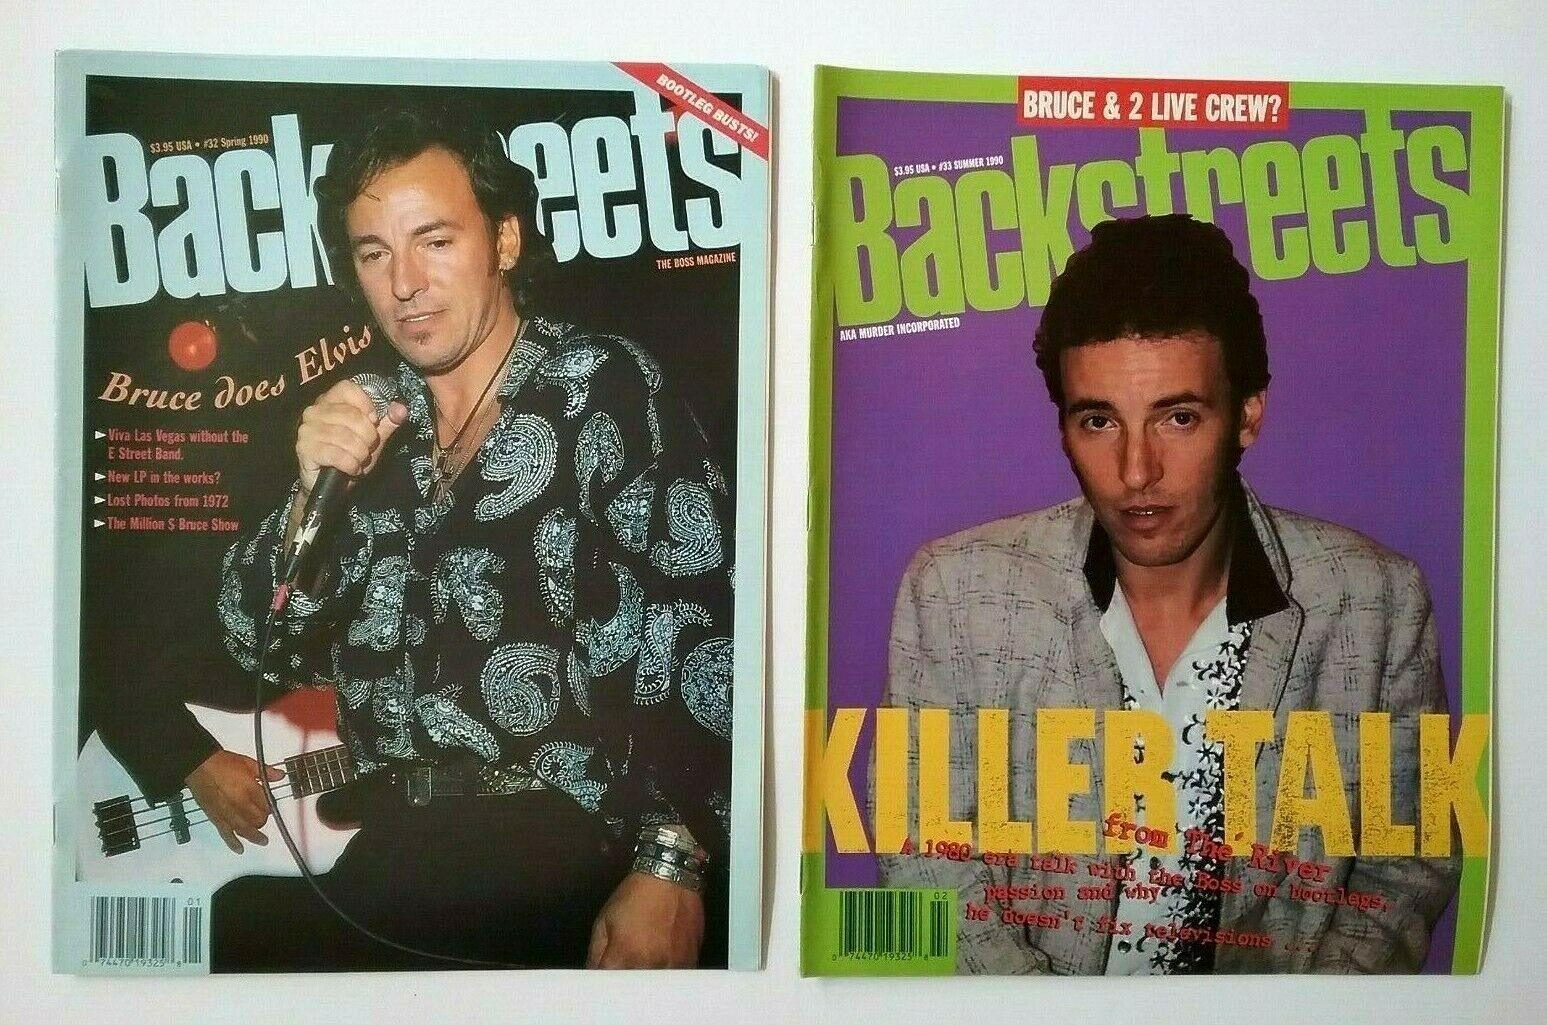 "backstreets" The Boss Magazine Two Issues "bruce Springsteen & E Street Band"